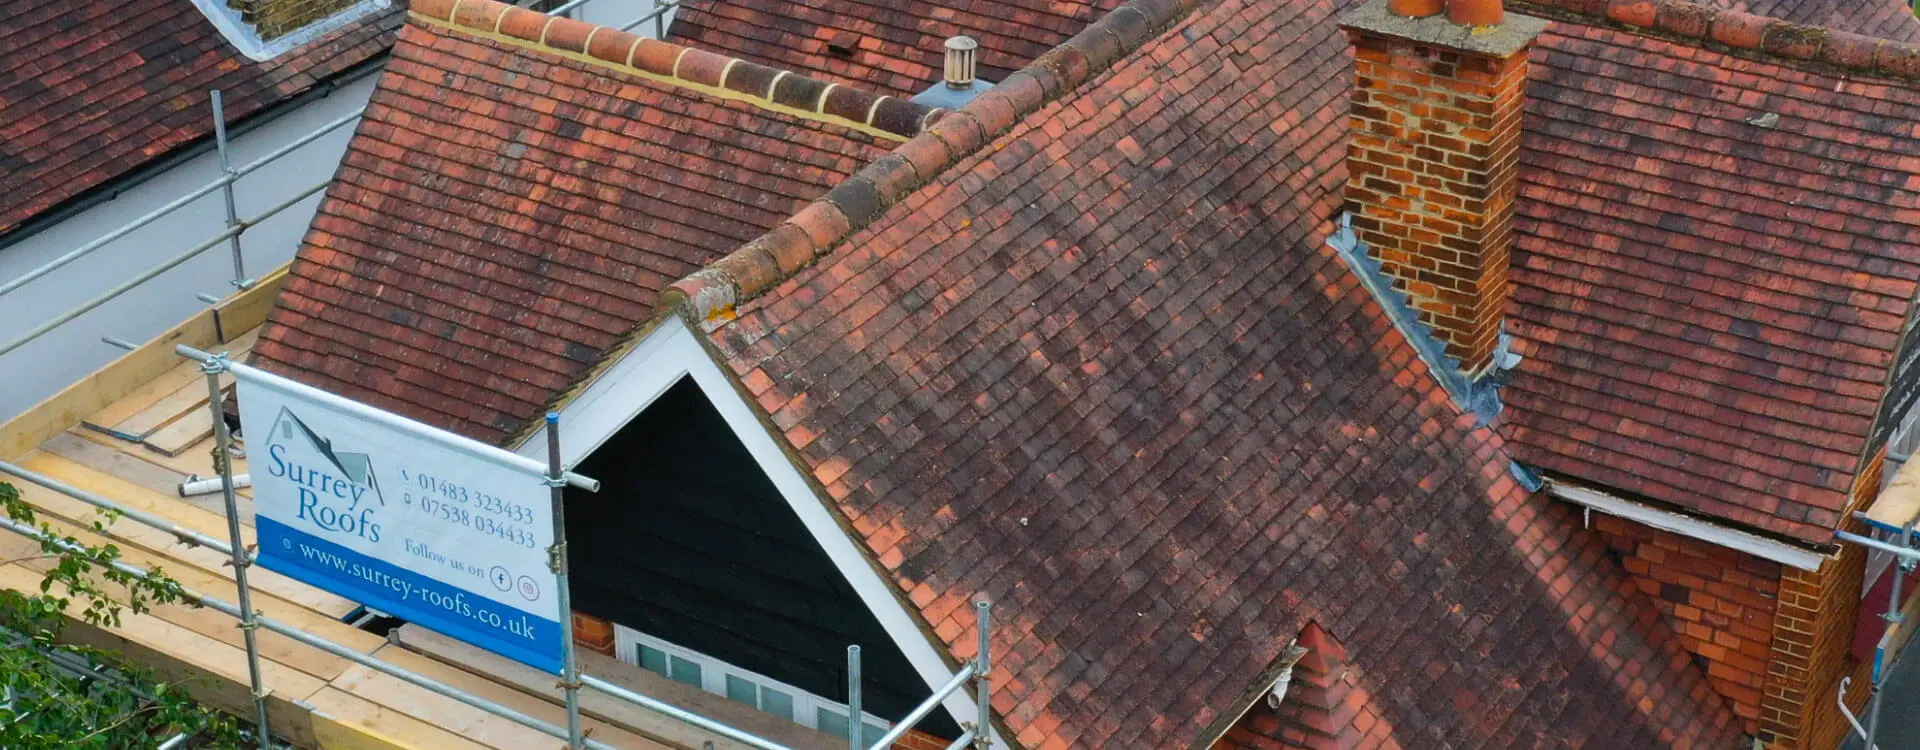 PROFESSIONAL NEW ROOF BUILDING SERVICES IN EAST HORSLEY